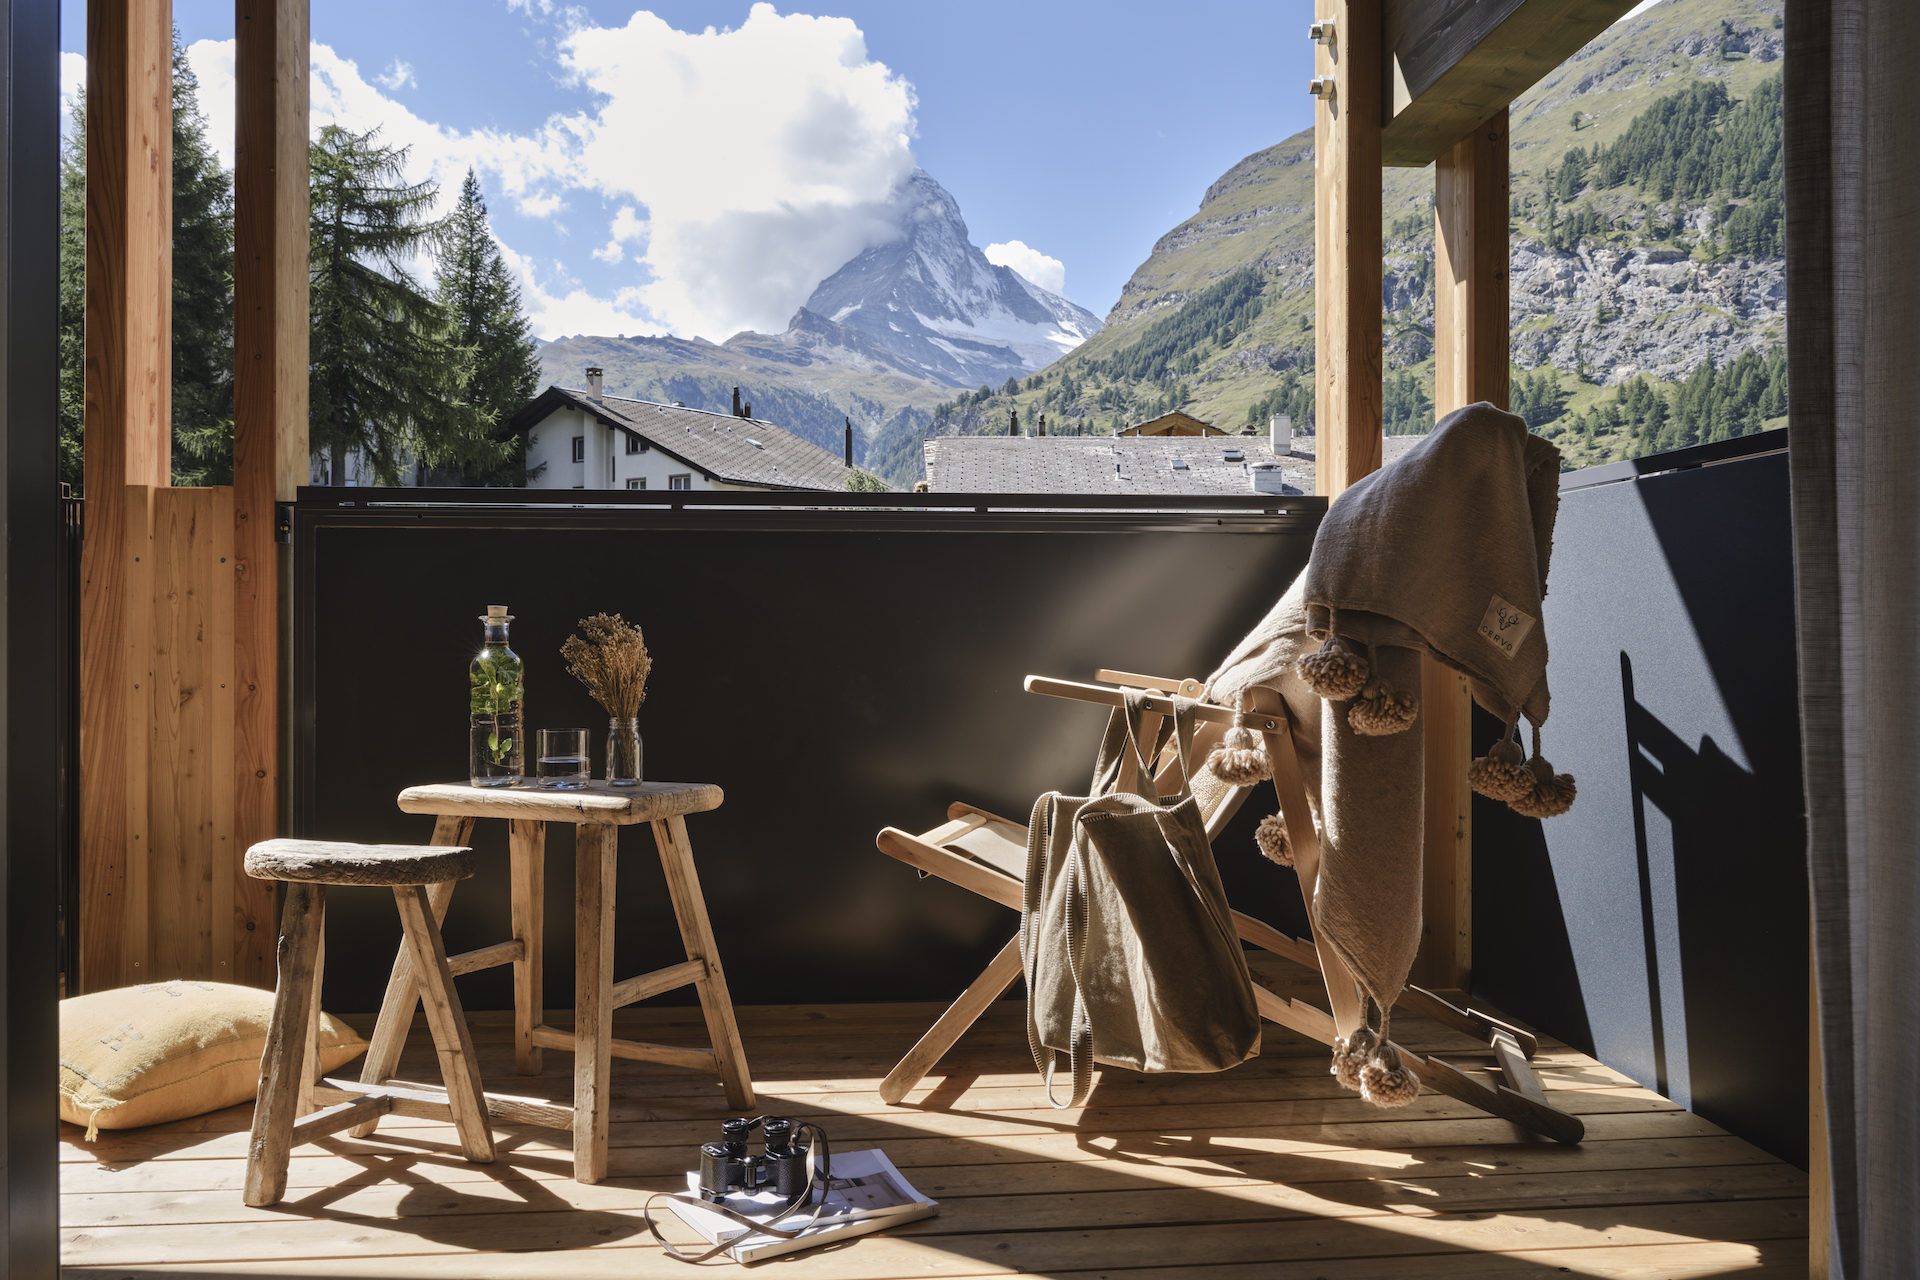 Balcony with view of the Matterhorn